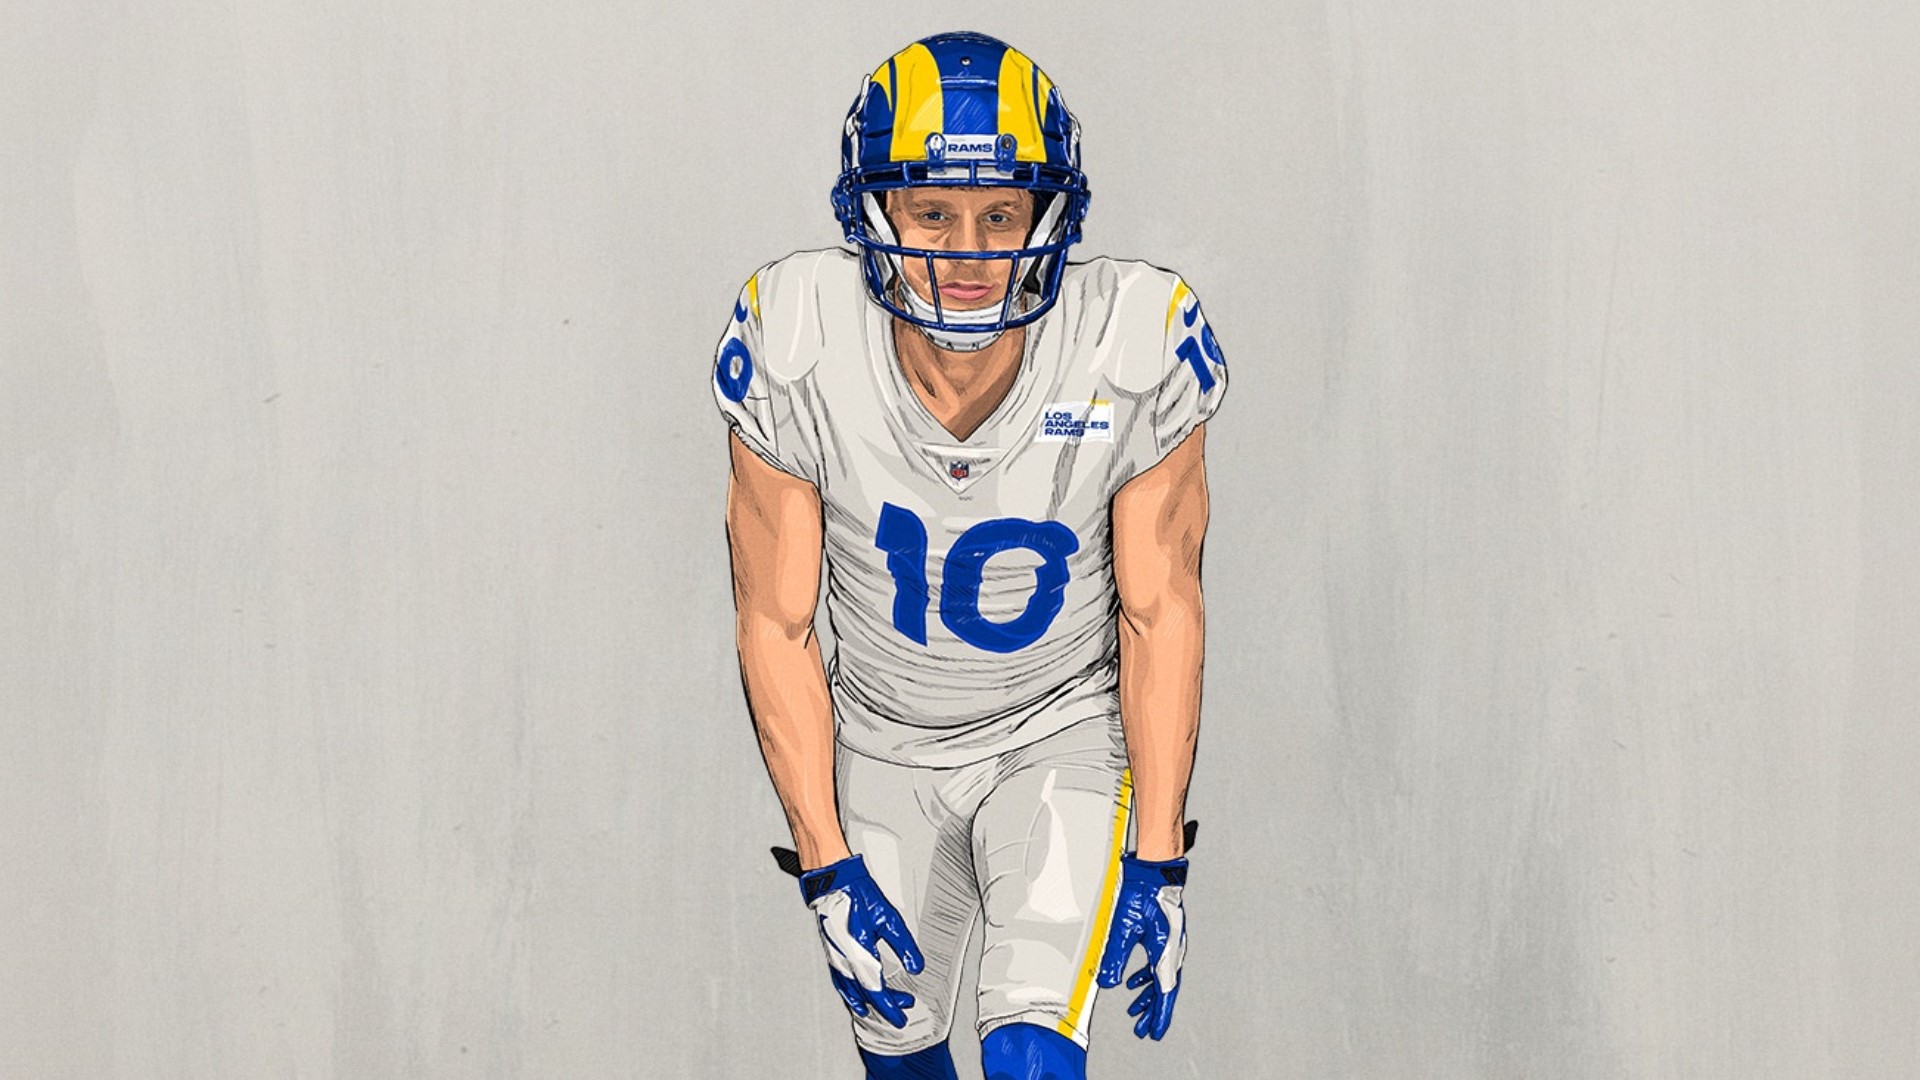 Kupp told KREM he'll be representing all the people who helped him, especially those at Eastern, when he dons the number for the Rams this fall.